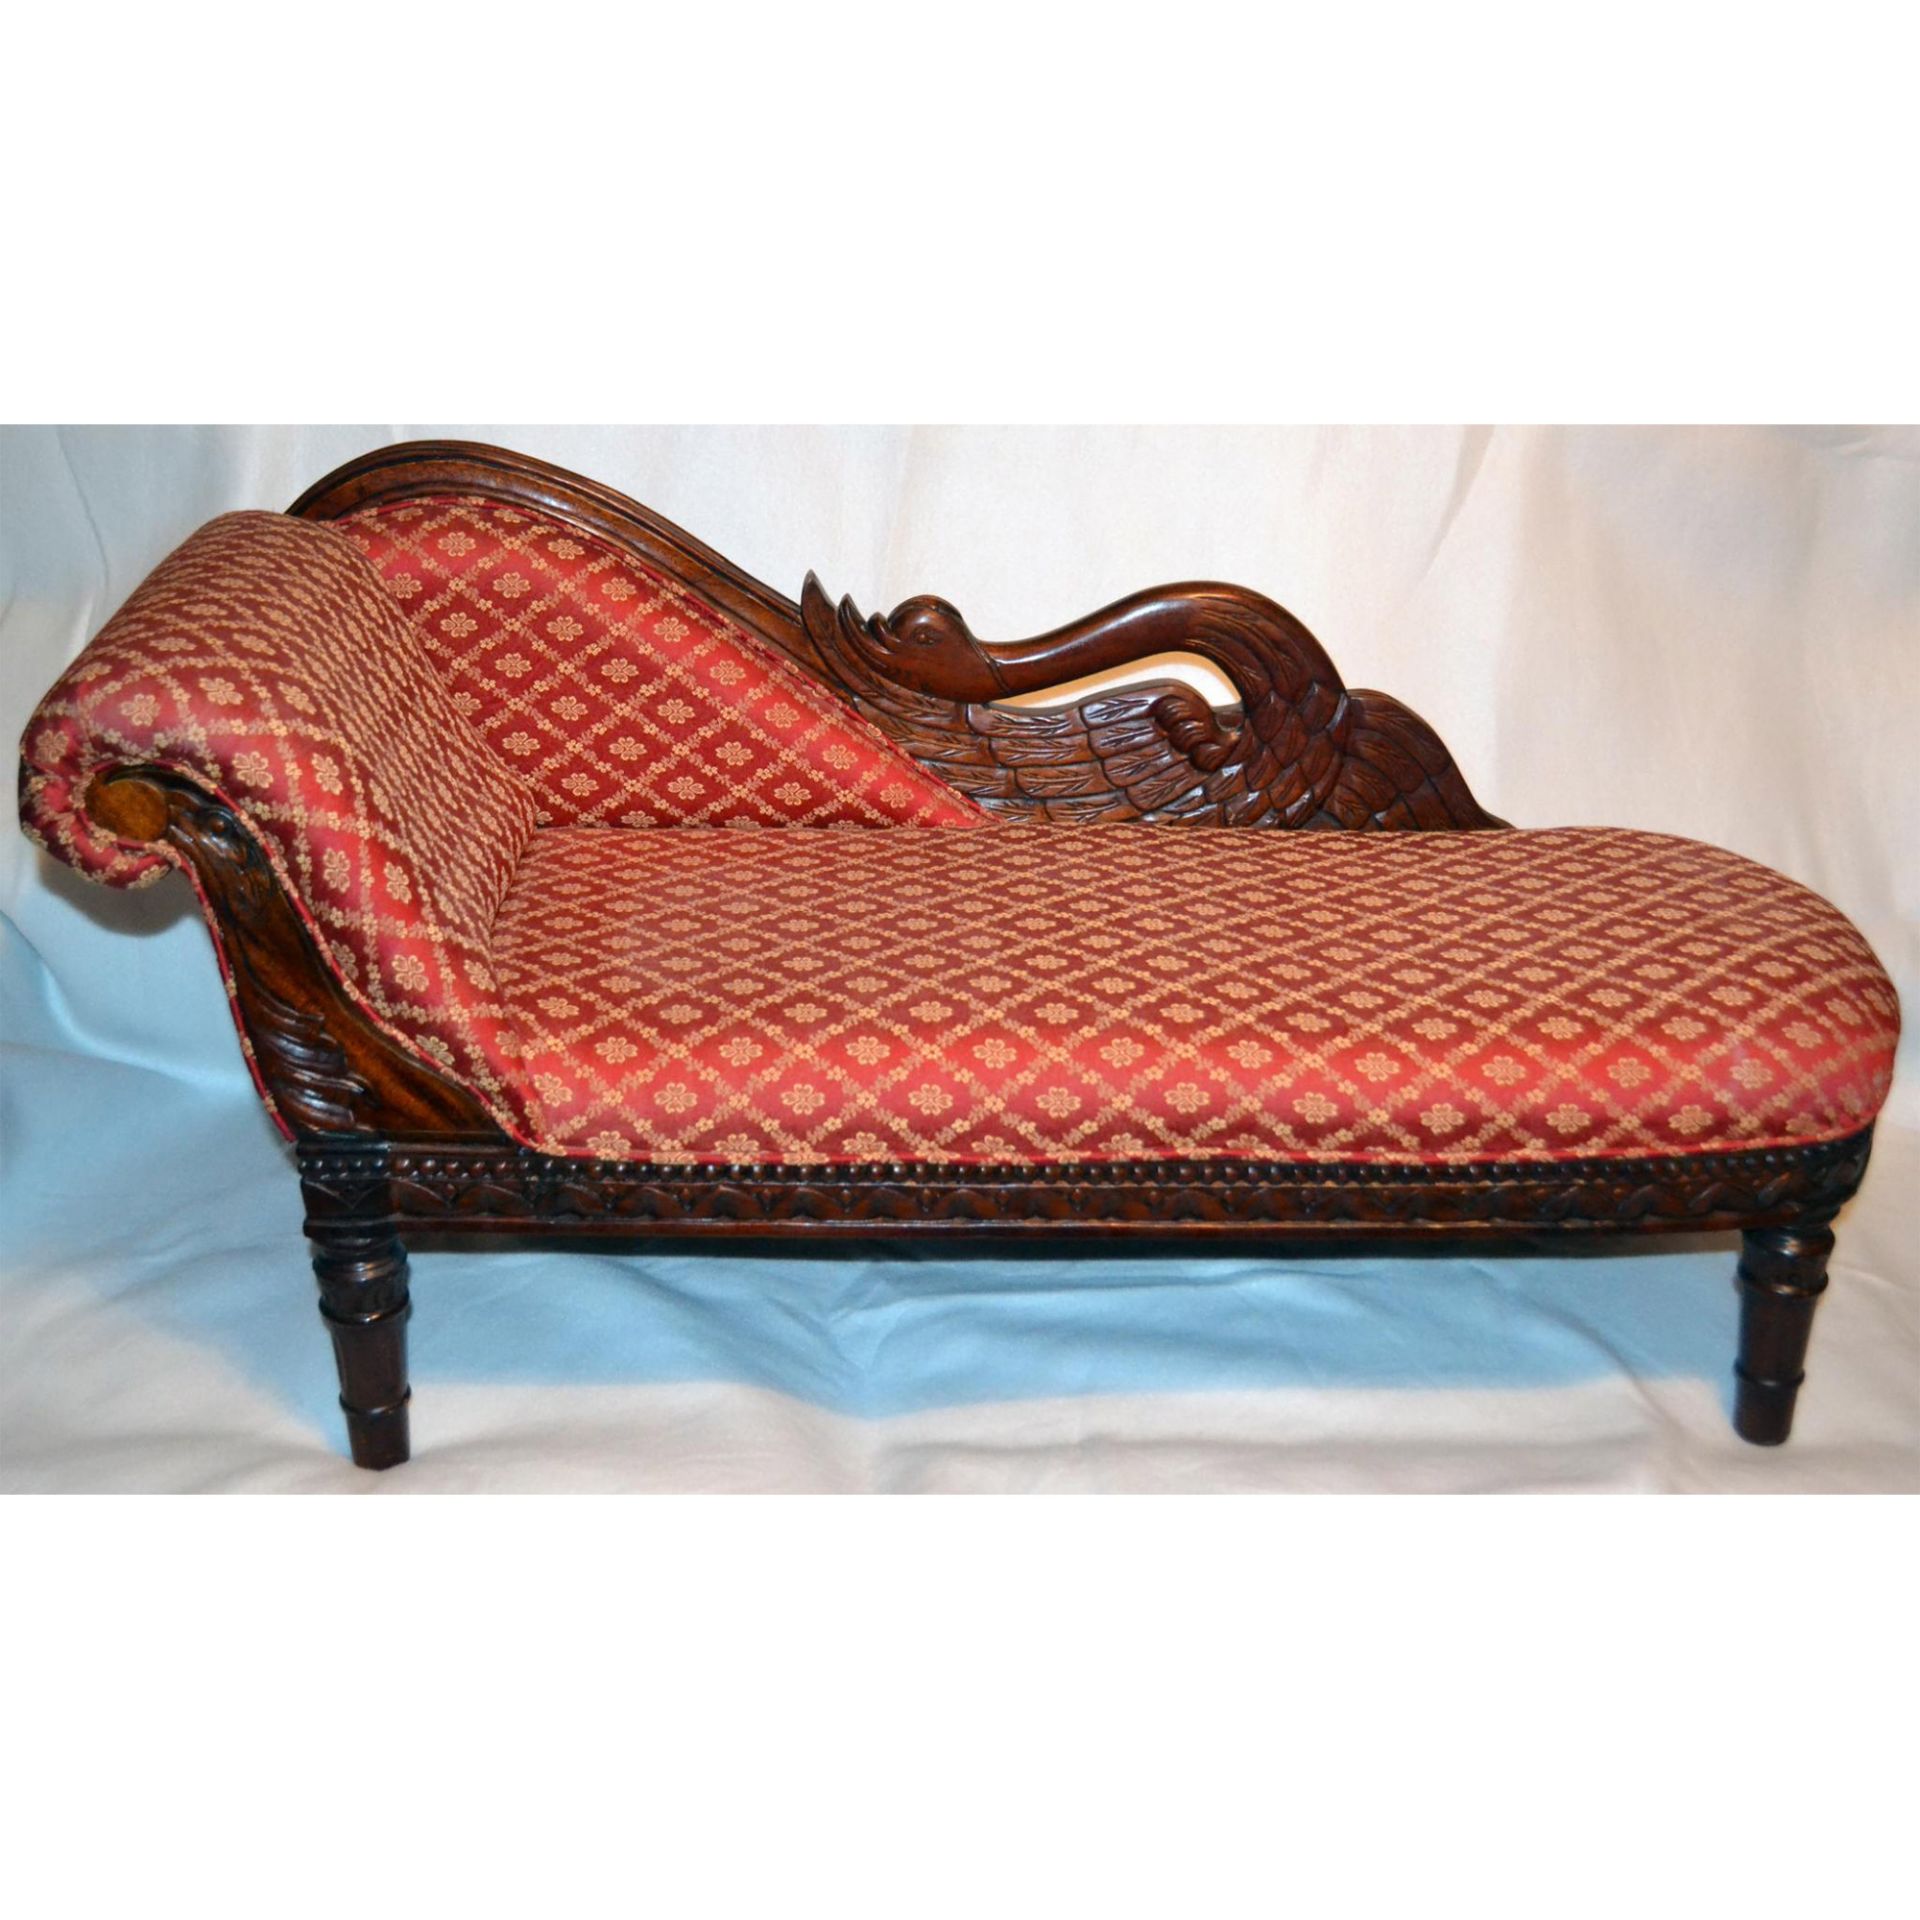 Miniature European Mahogany Hand Carved And Crafted Swan Sofa, Upholstered In Red/Gold Pattern Damas